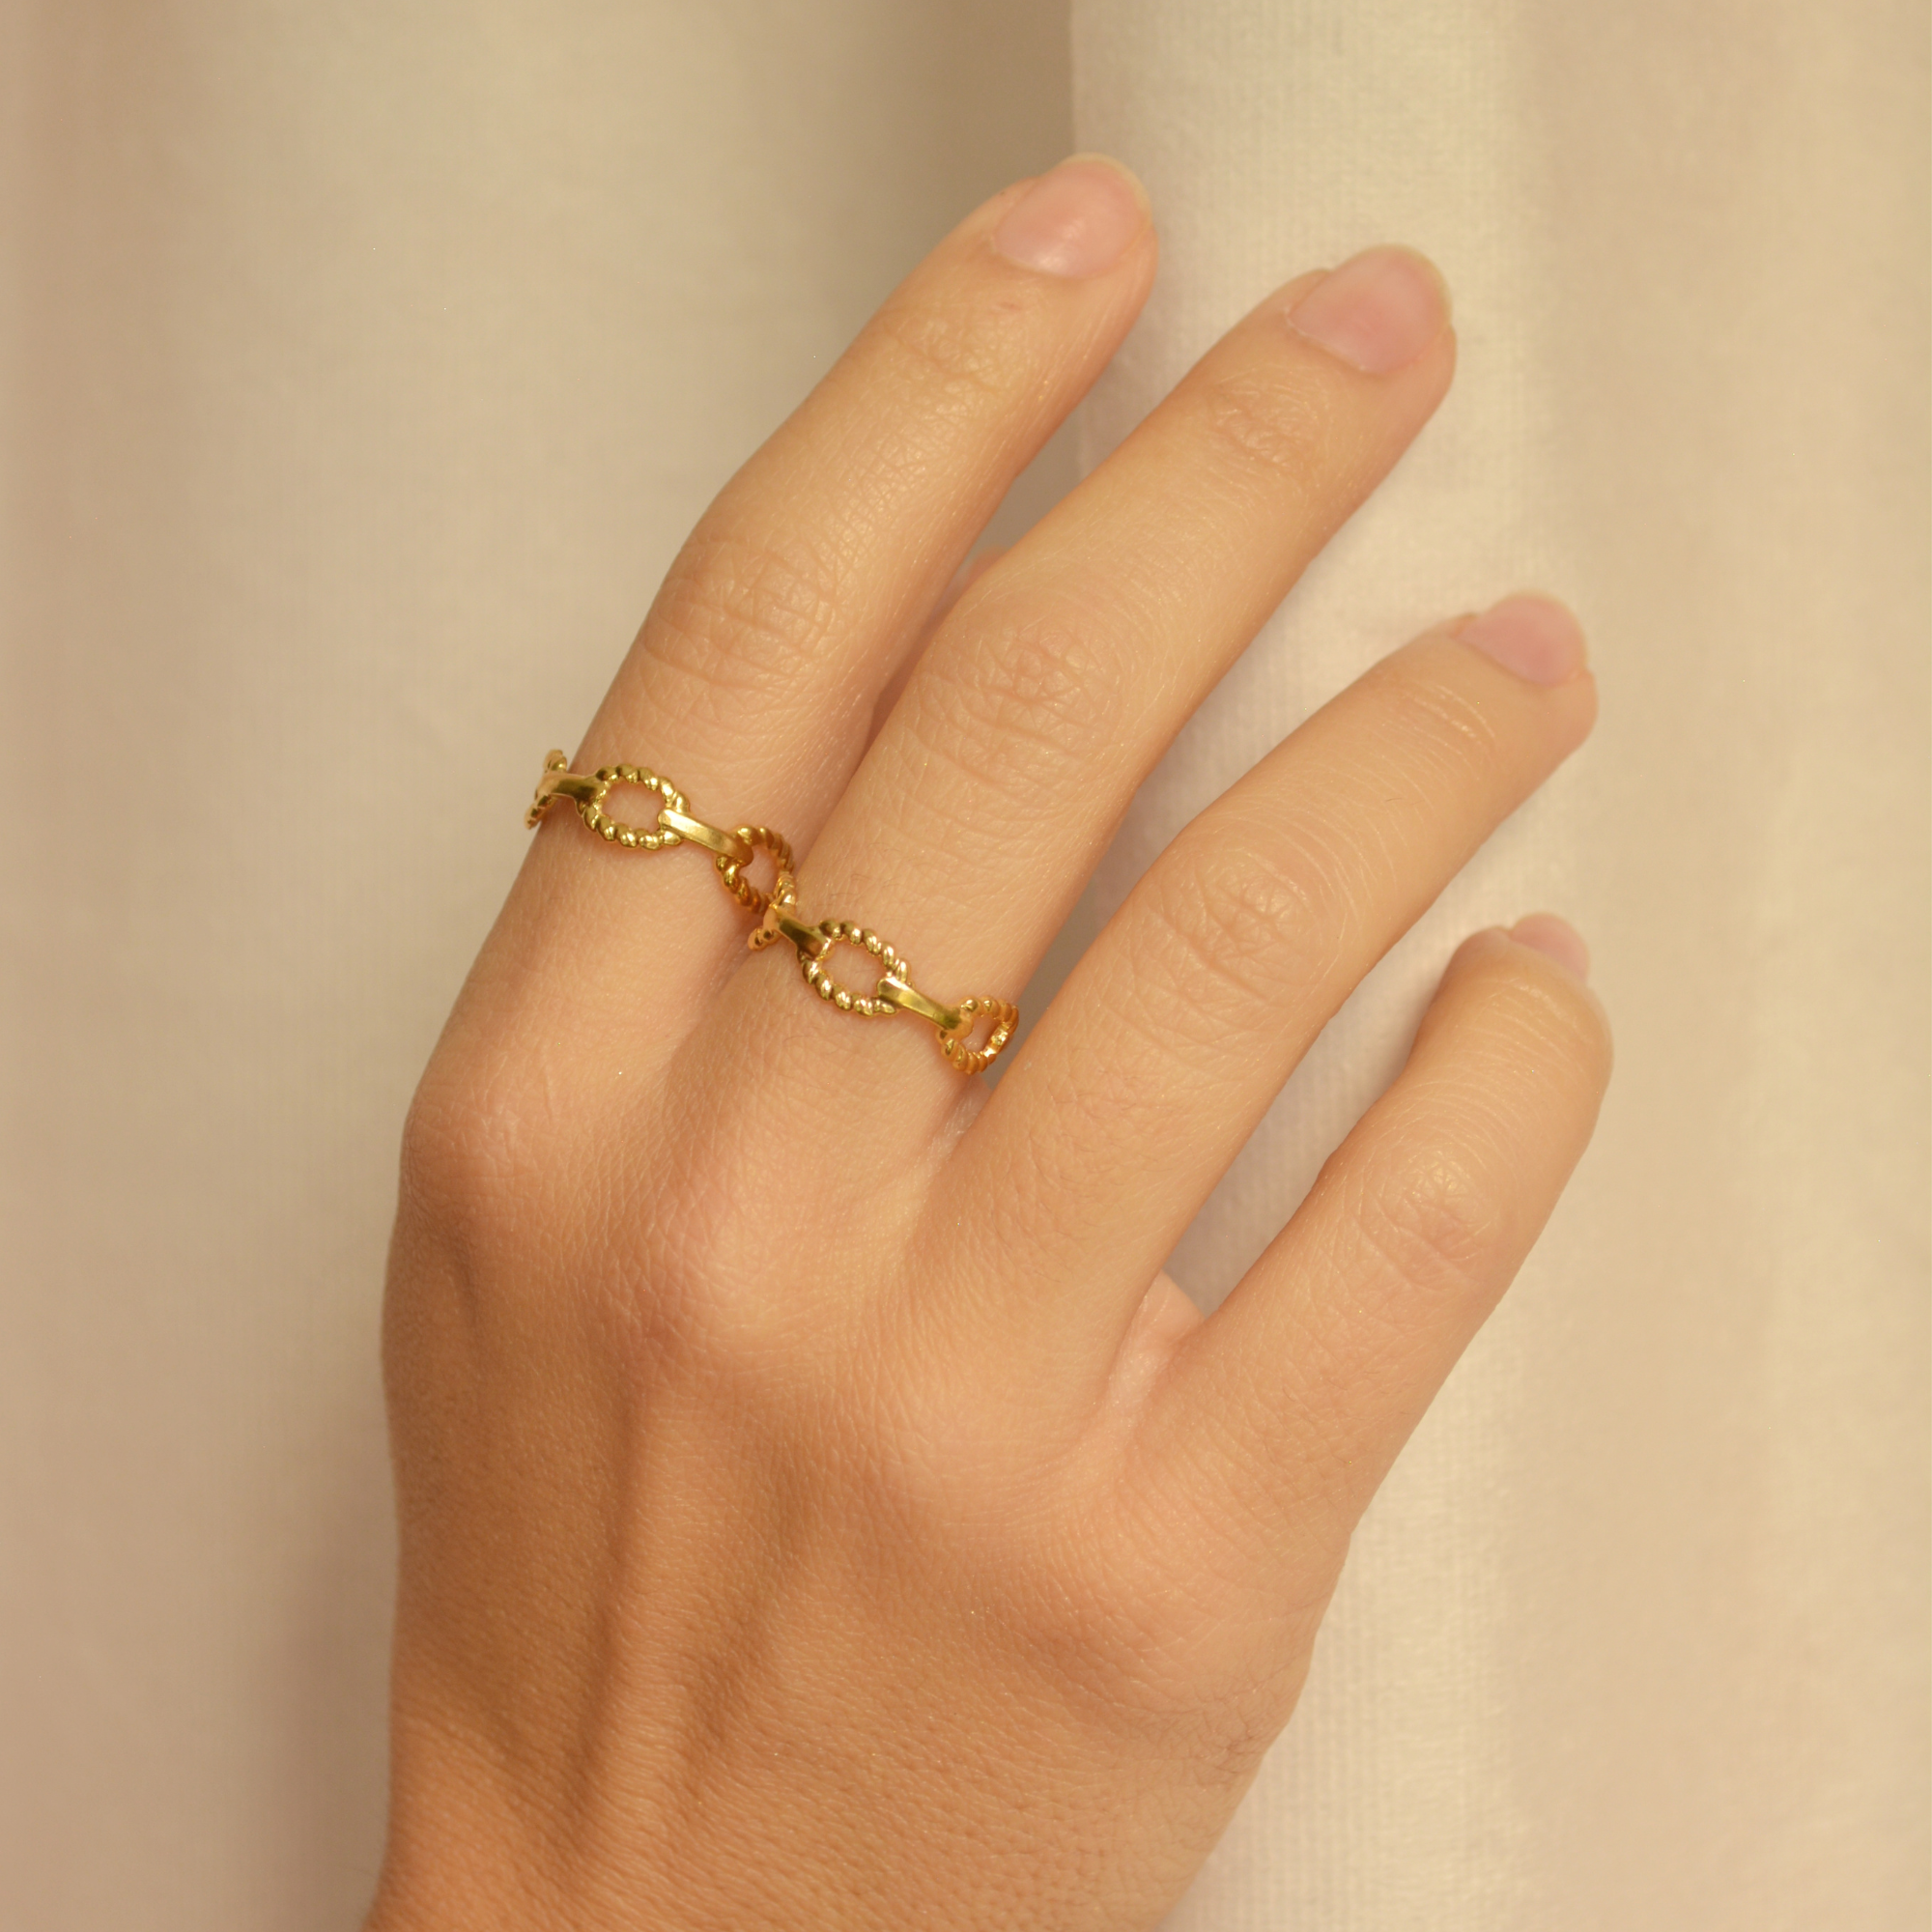 Gold and Silver Cuff Rings